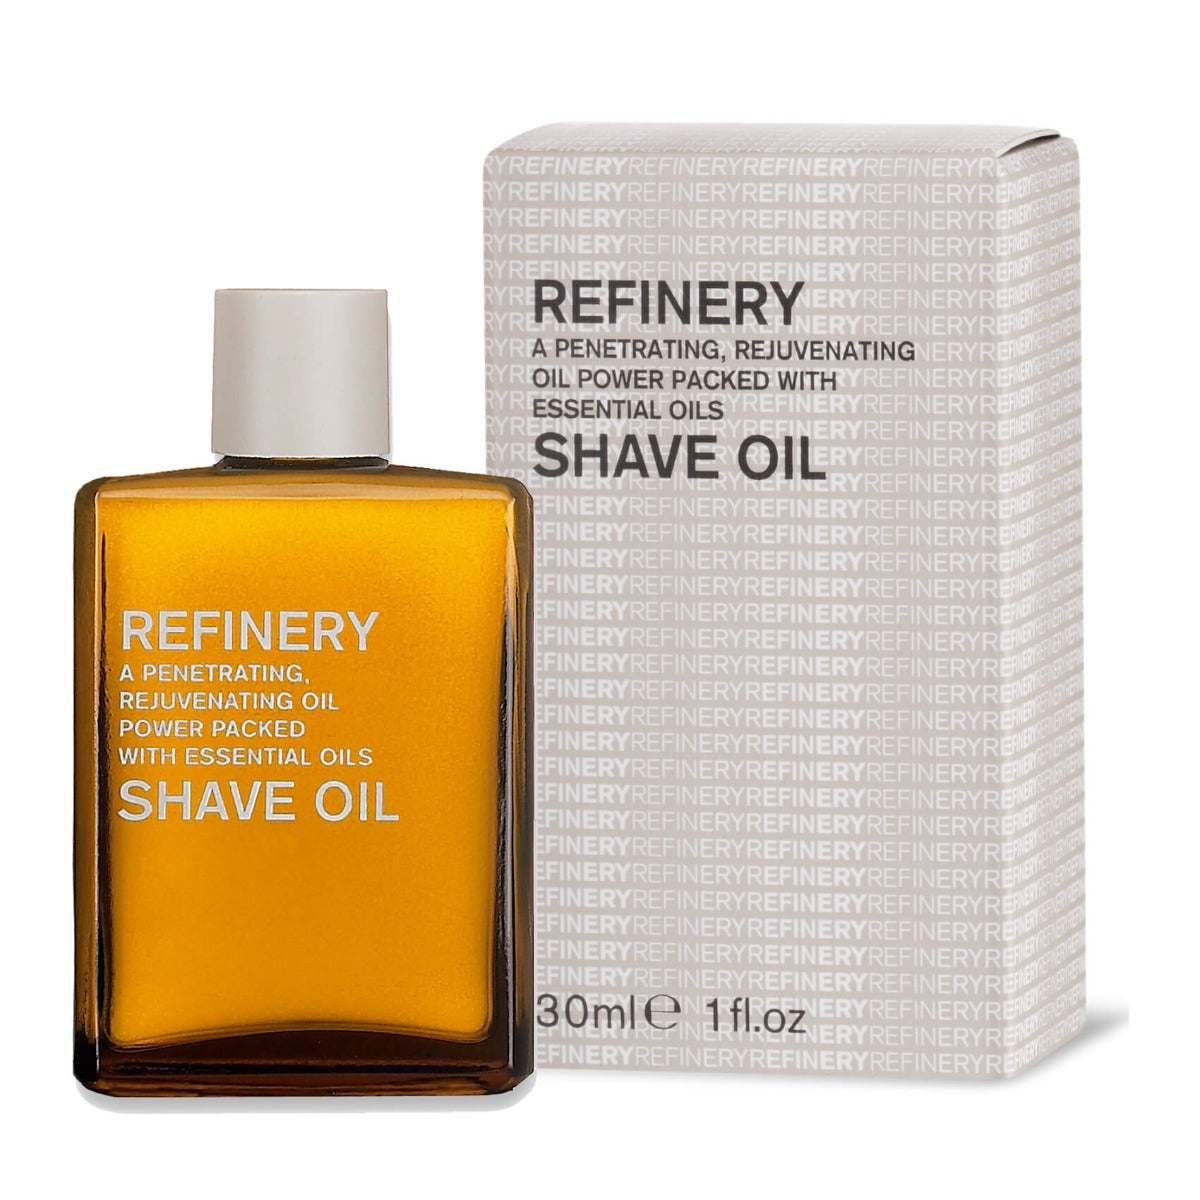 The Refinery Shave Oil